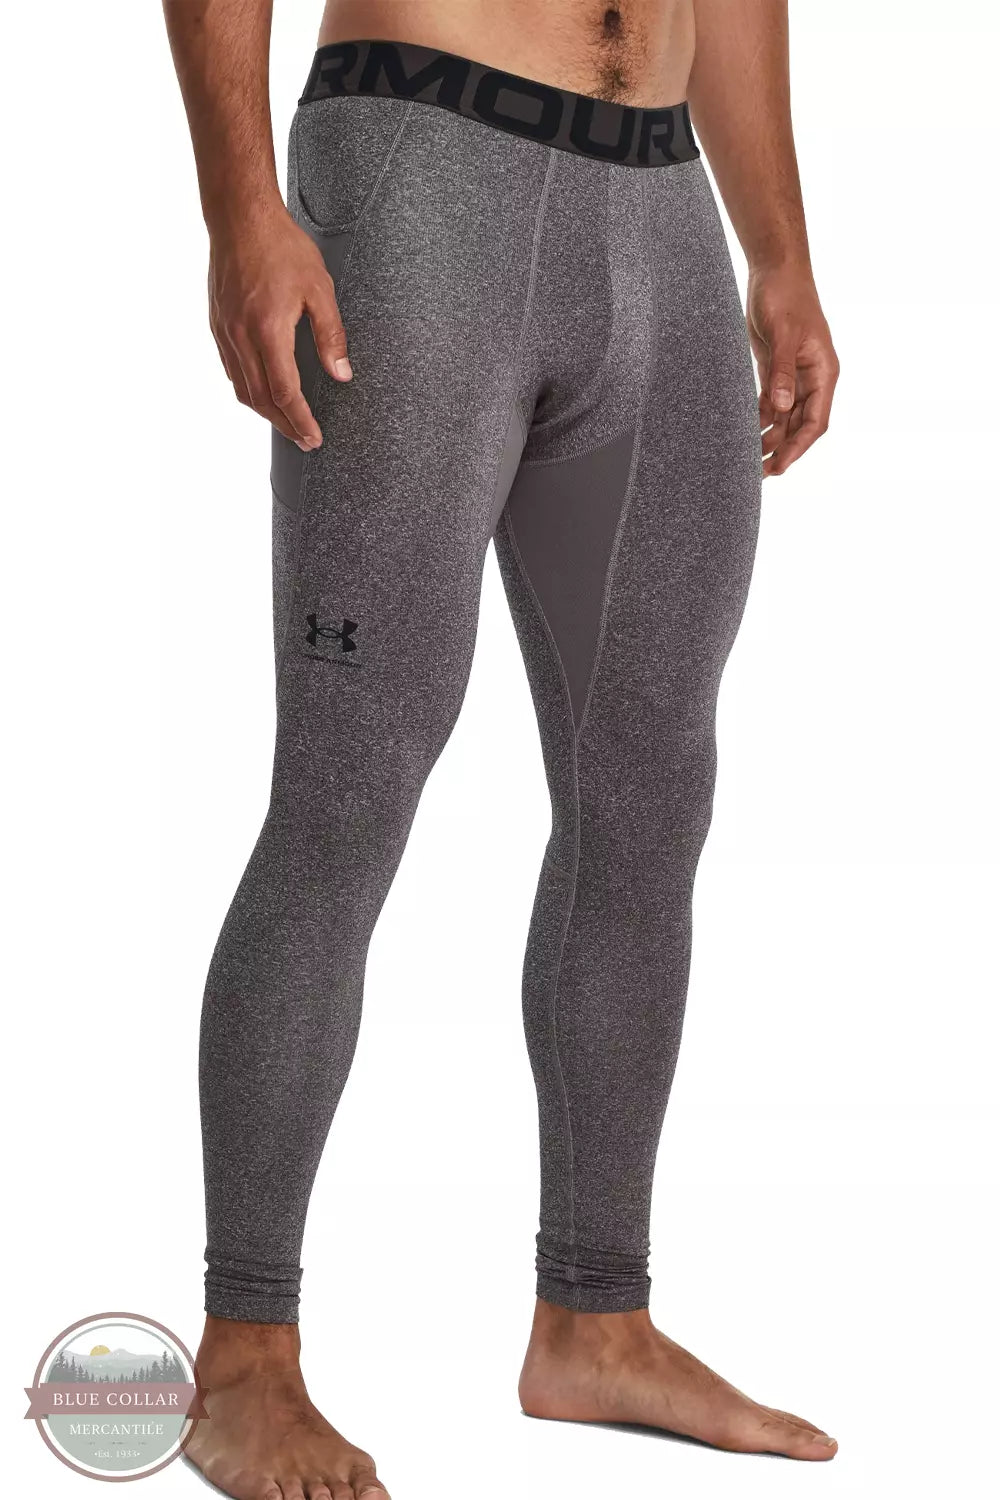 Under Armour 1366075-020 ColdGear Leggings in Charcoal Light Heather / Black Front View